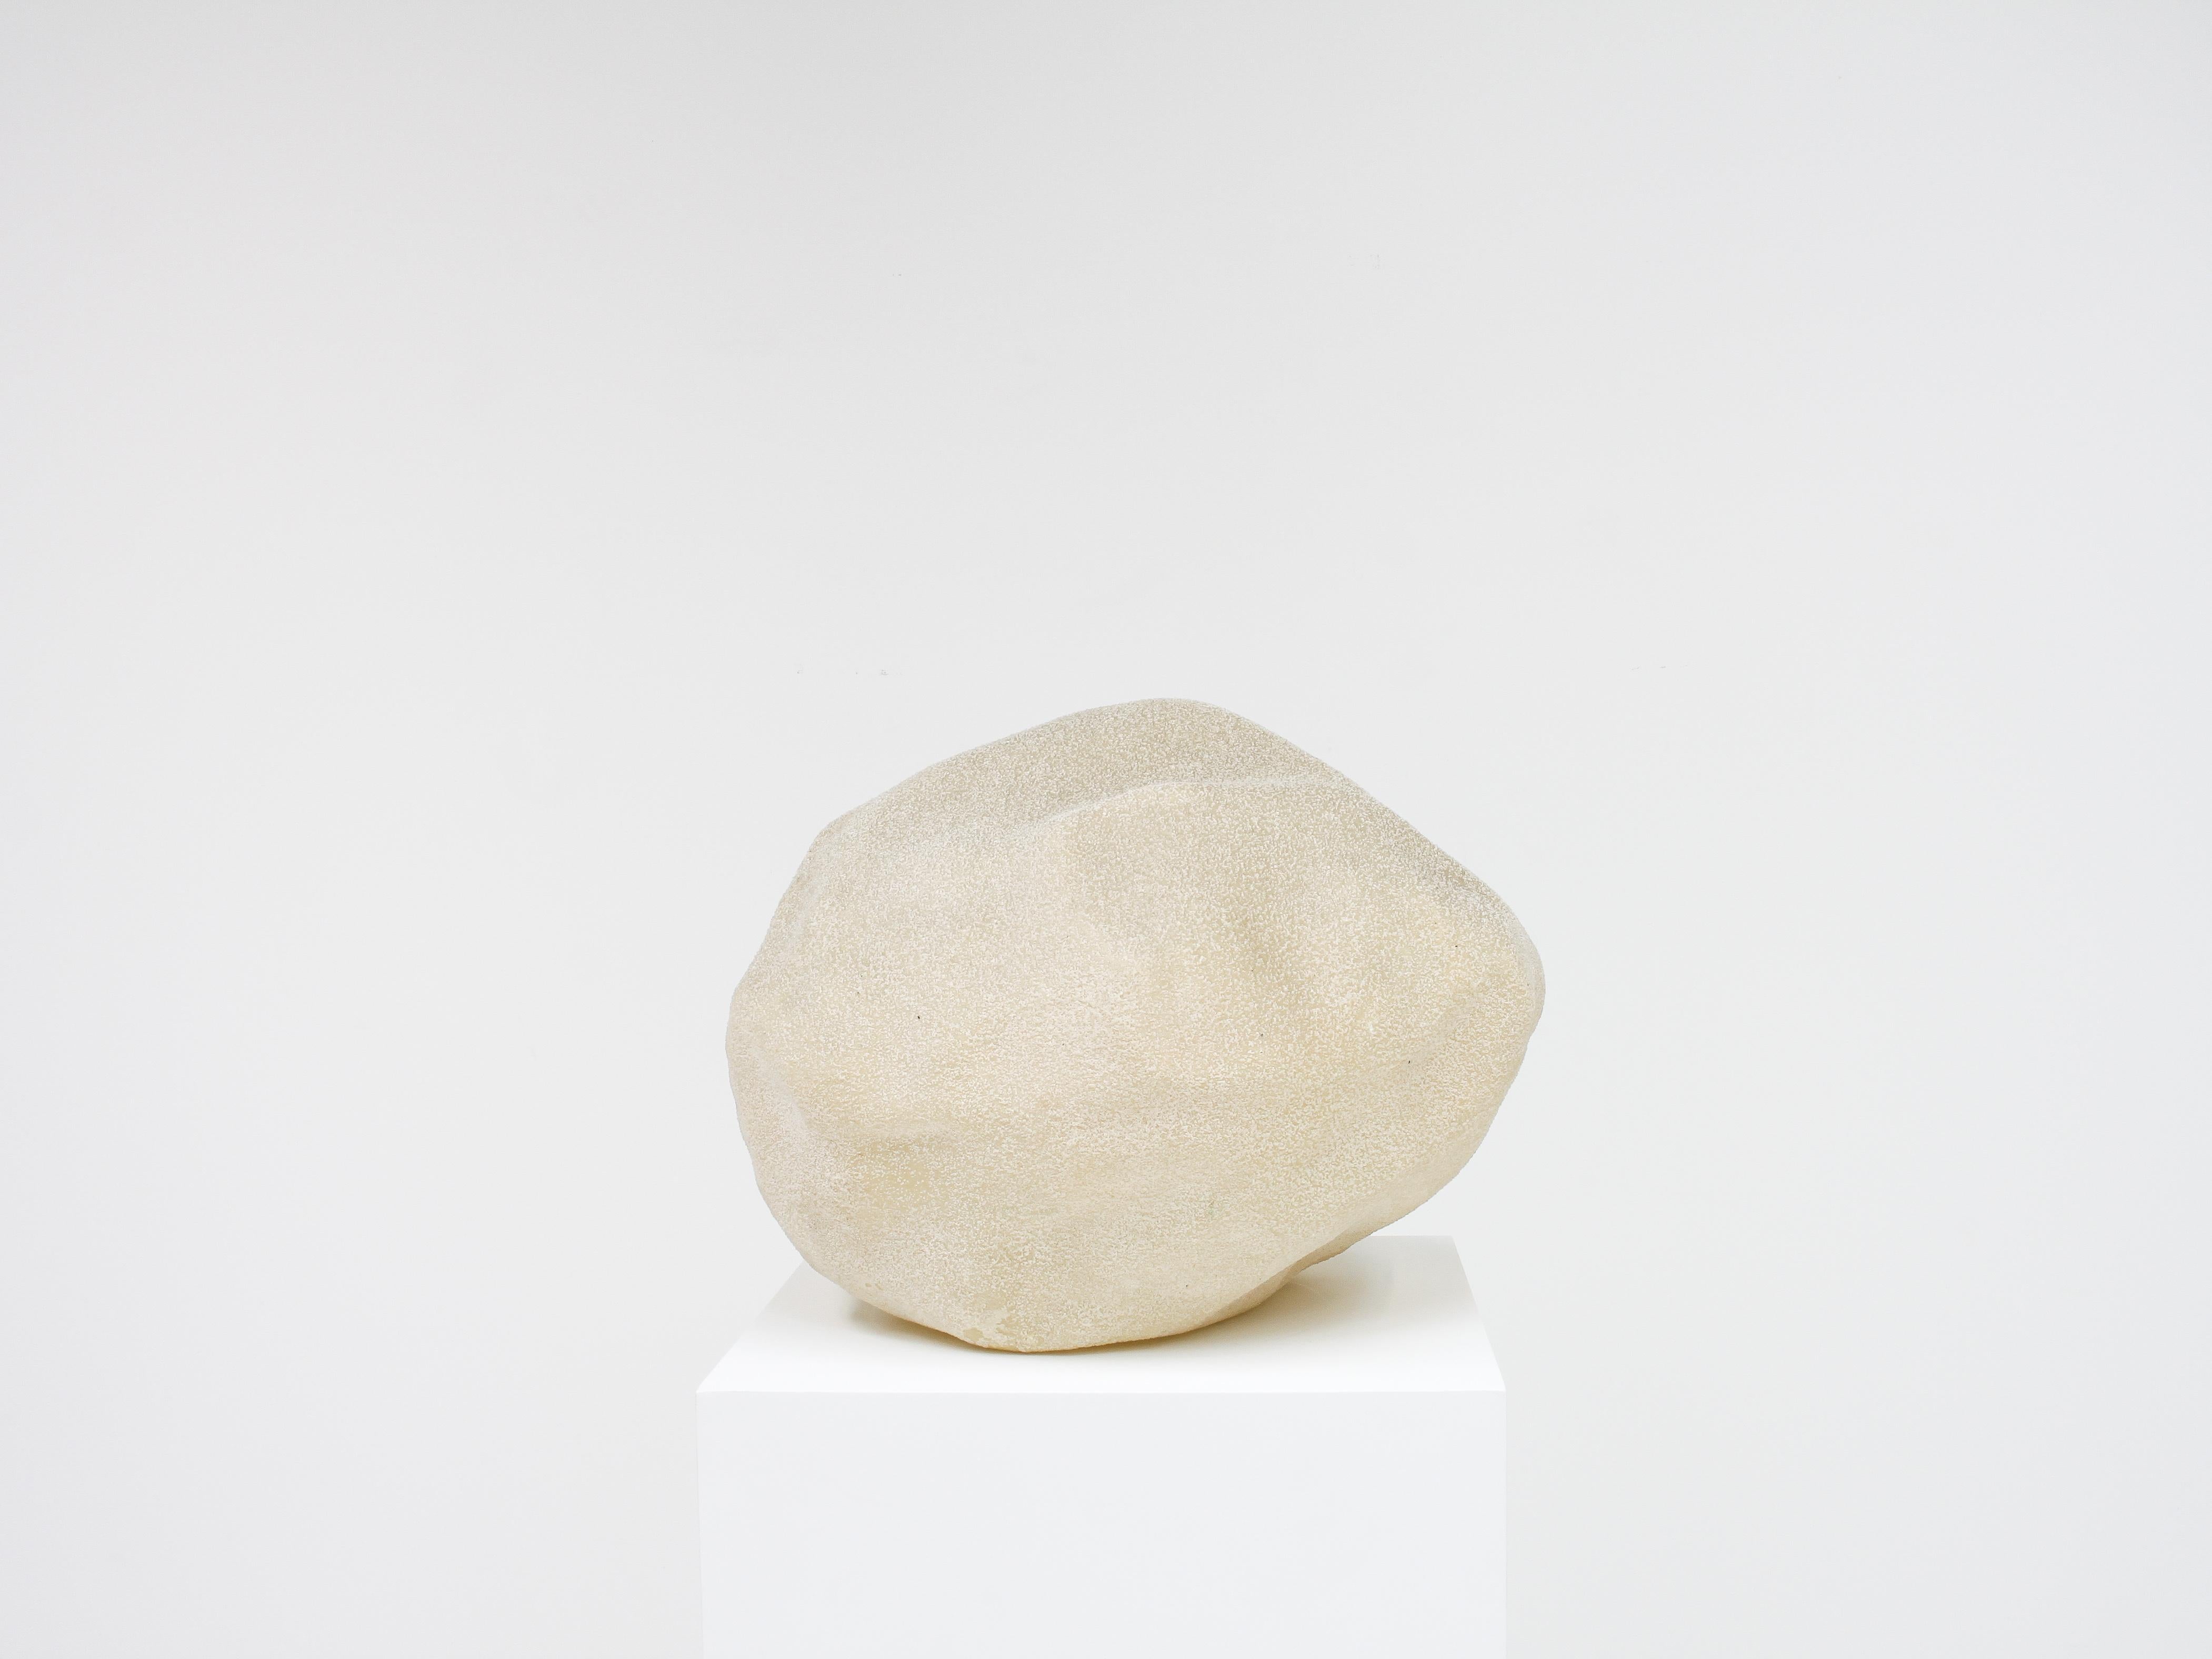 A hard-to-find oversized 'Dora' Moon Rock lamp designed by André Cazenave for Singleton, Italy, 1970s

Created from polyester resin and marble powder the lights create a beautifully atmospheric glow that is reminiscent of the moon. Each was